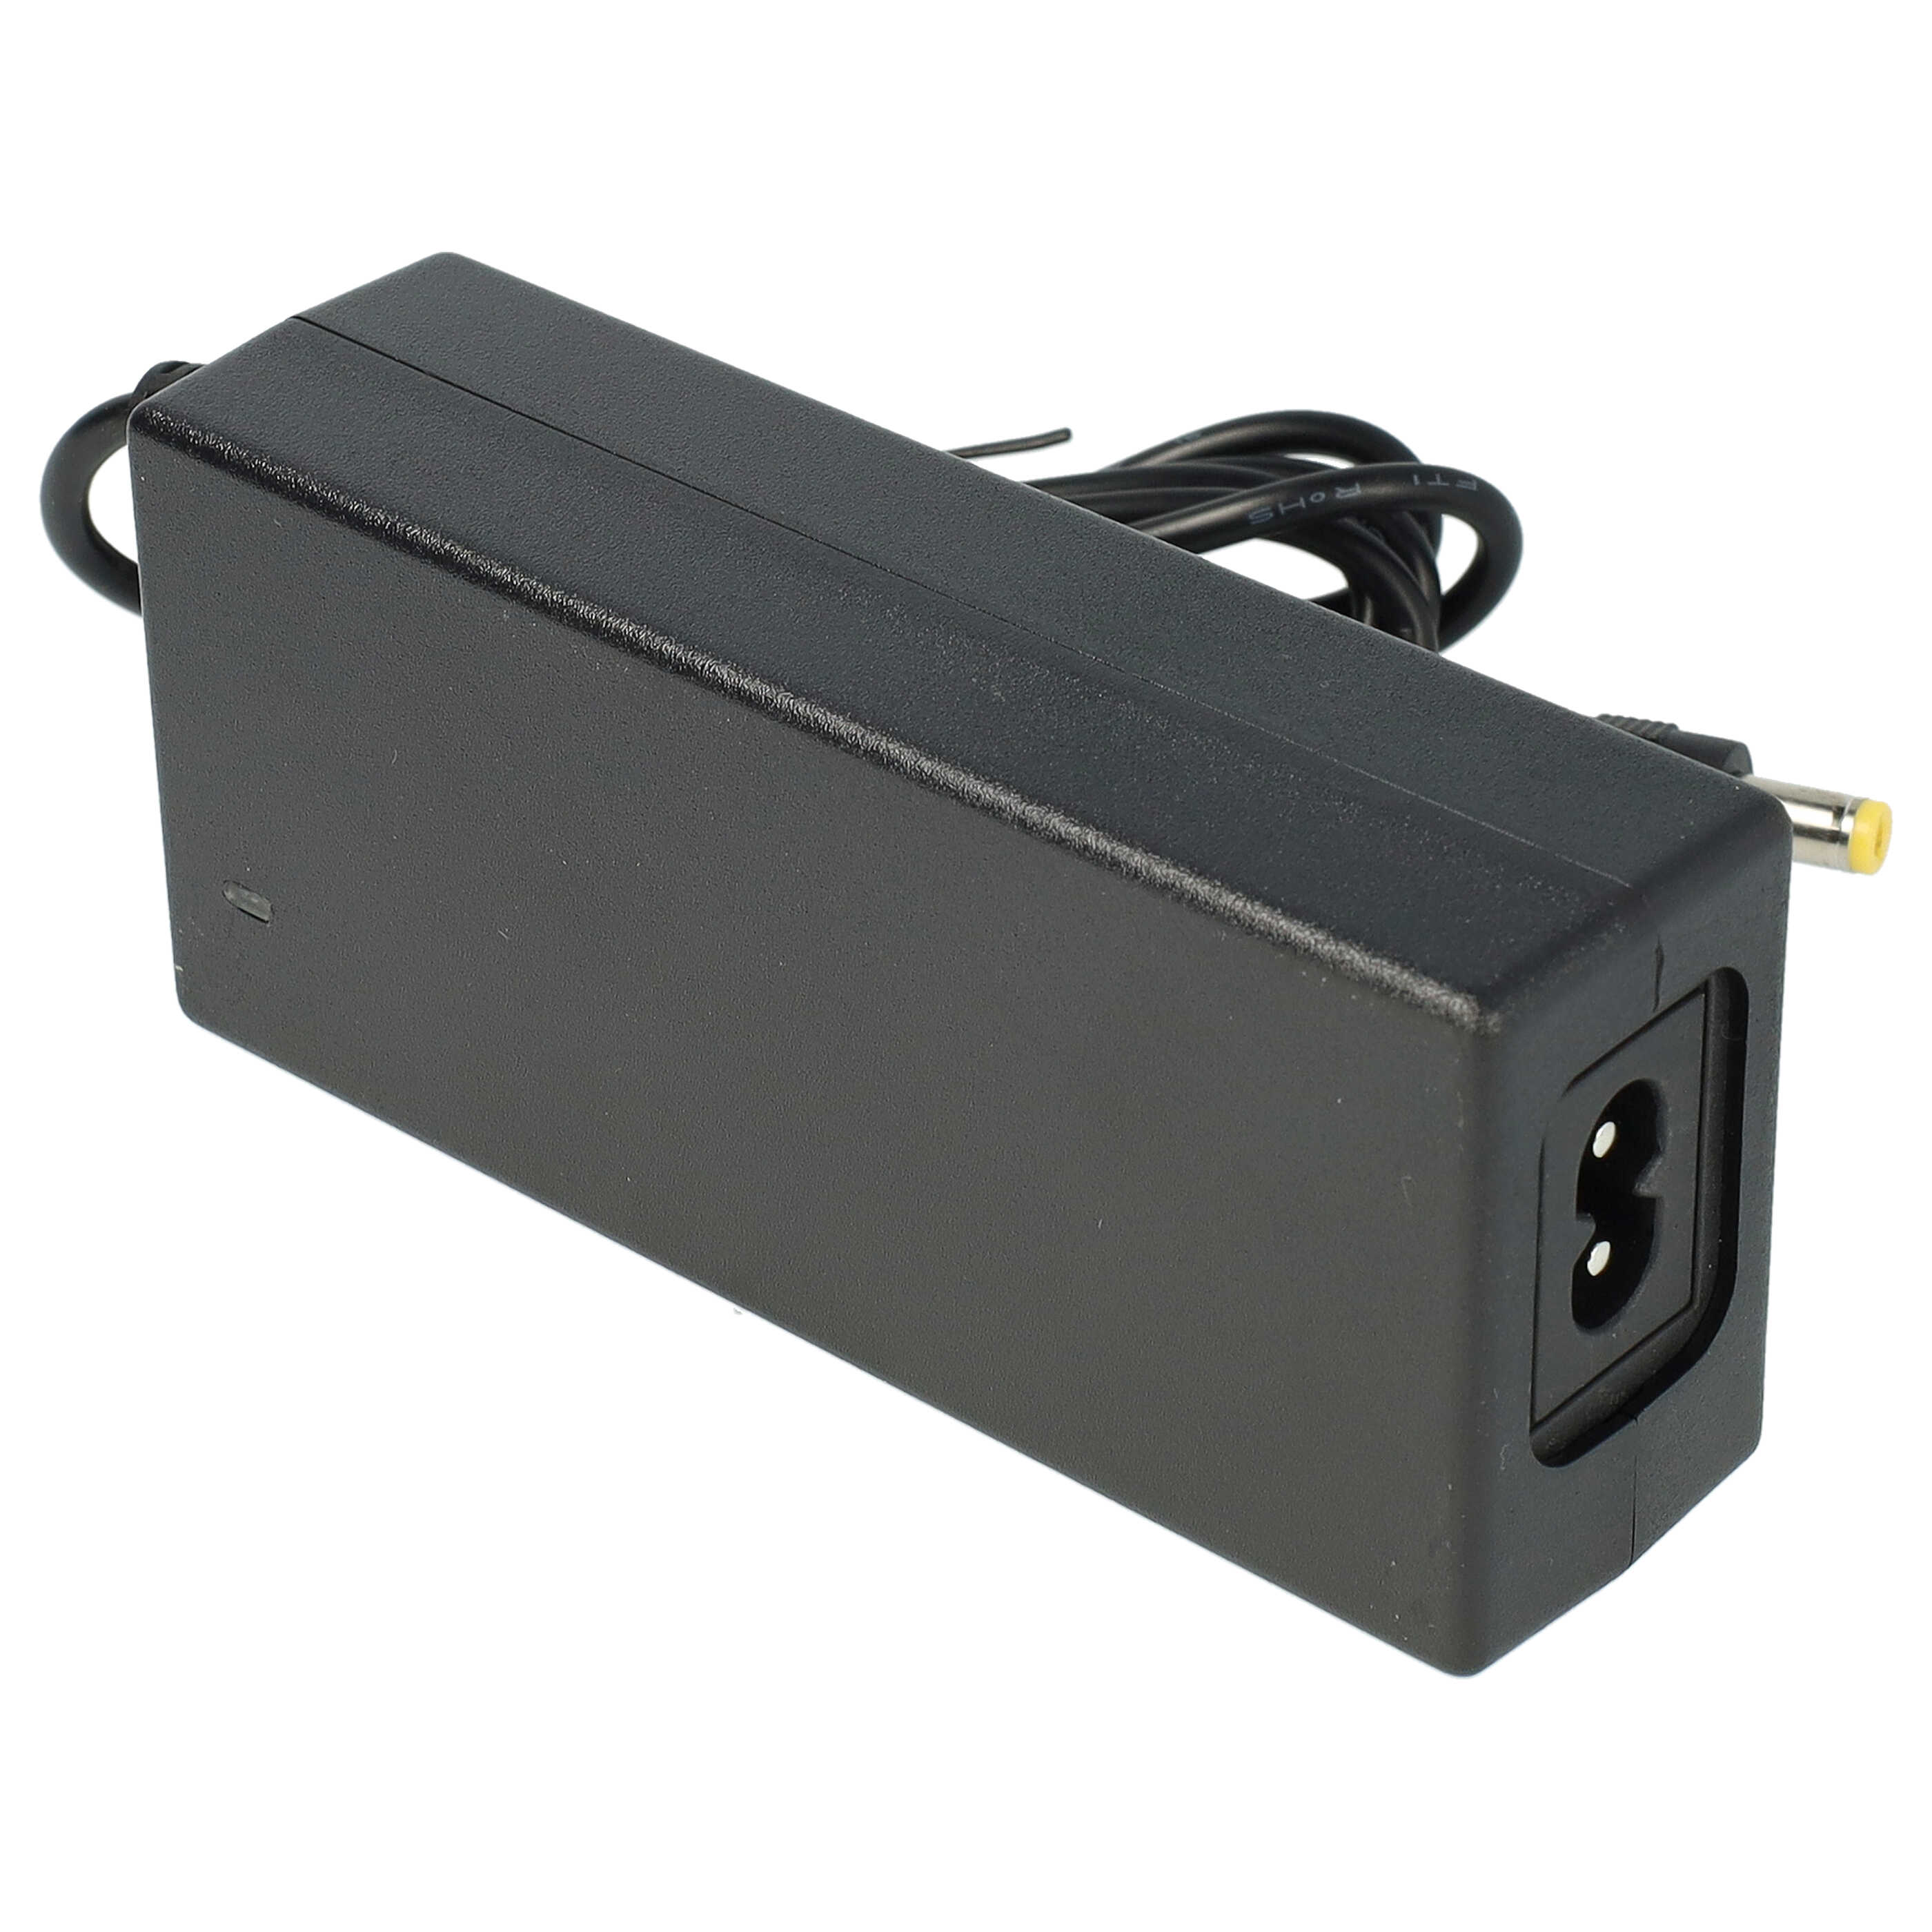 Mains Power Adapter with 5.5 x 2.1 mm Plug suitable for various Electric Devices - 24 V, 2 A